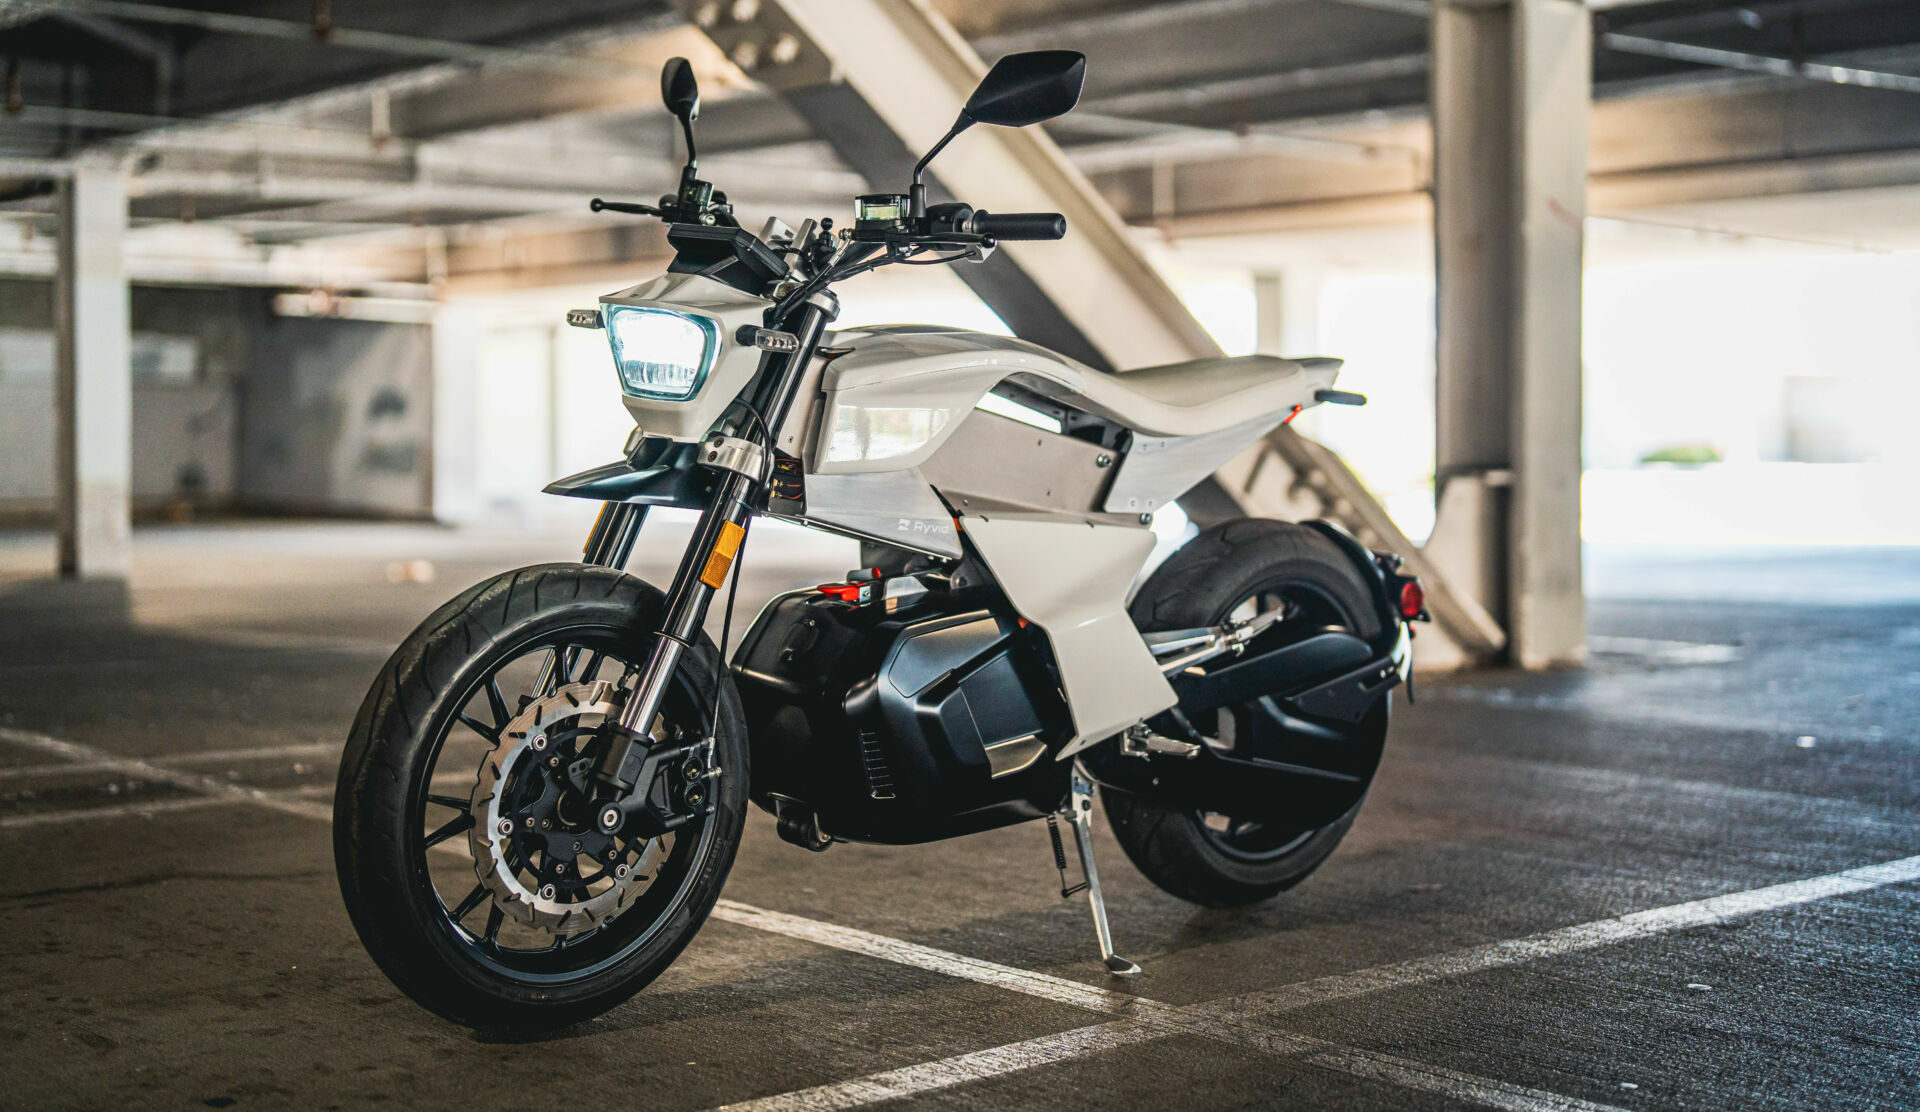 A Ryvid Anthem electric motorcycle. Photo courtesy Ryvid.